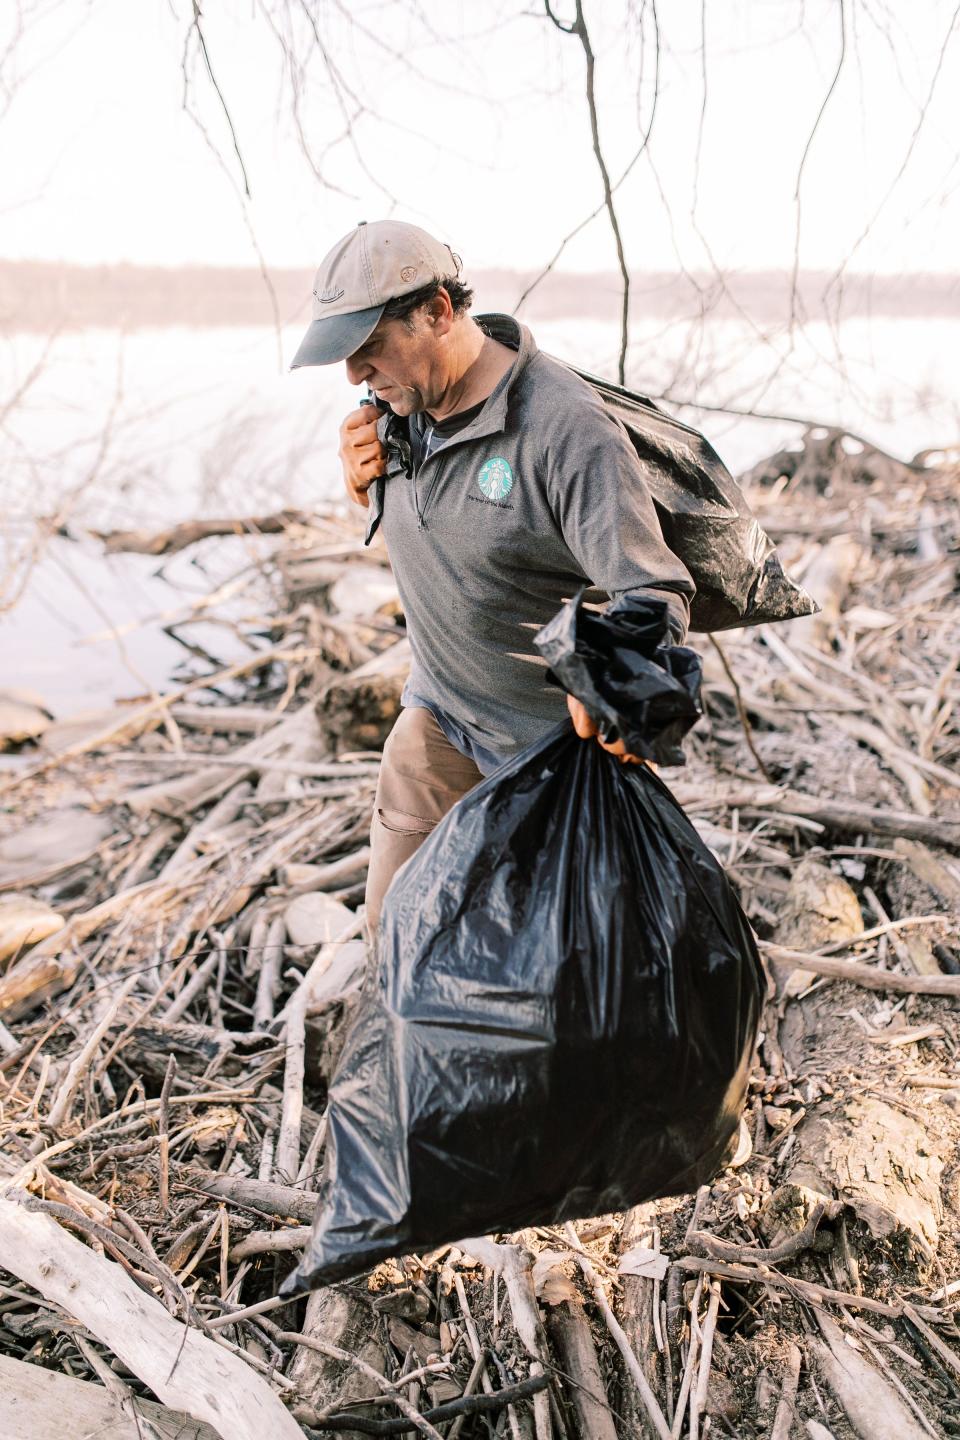 John Naylor removes bags of plastic items he cleaned up from the banks of the Susquehanna River near Wrightsville, Pa.